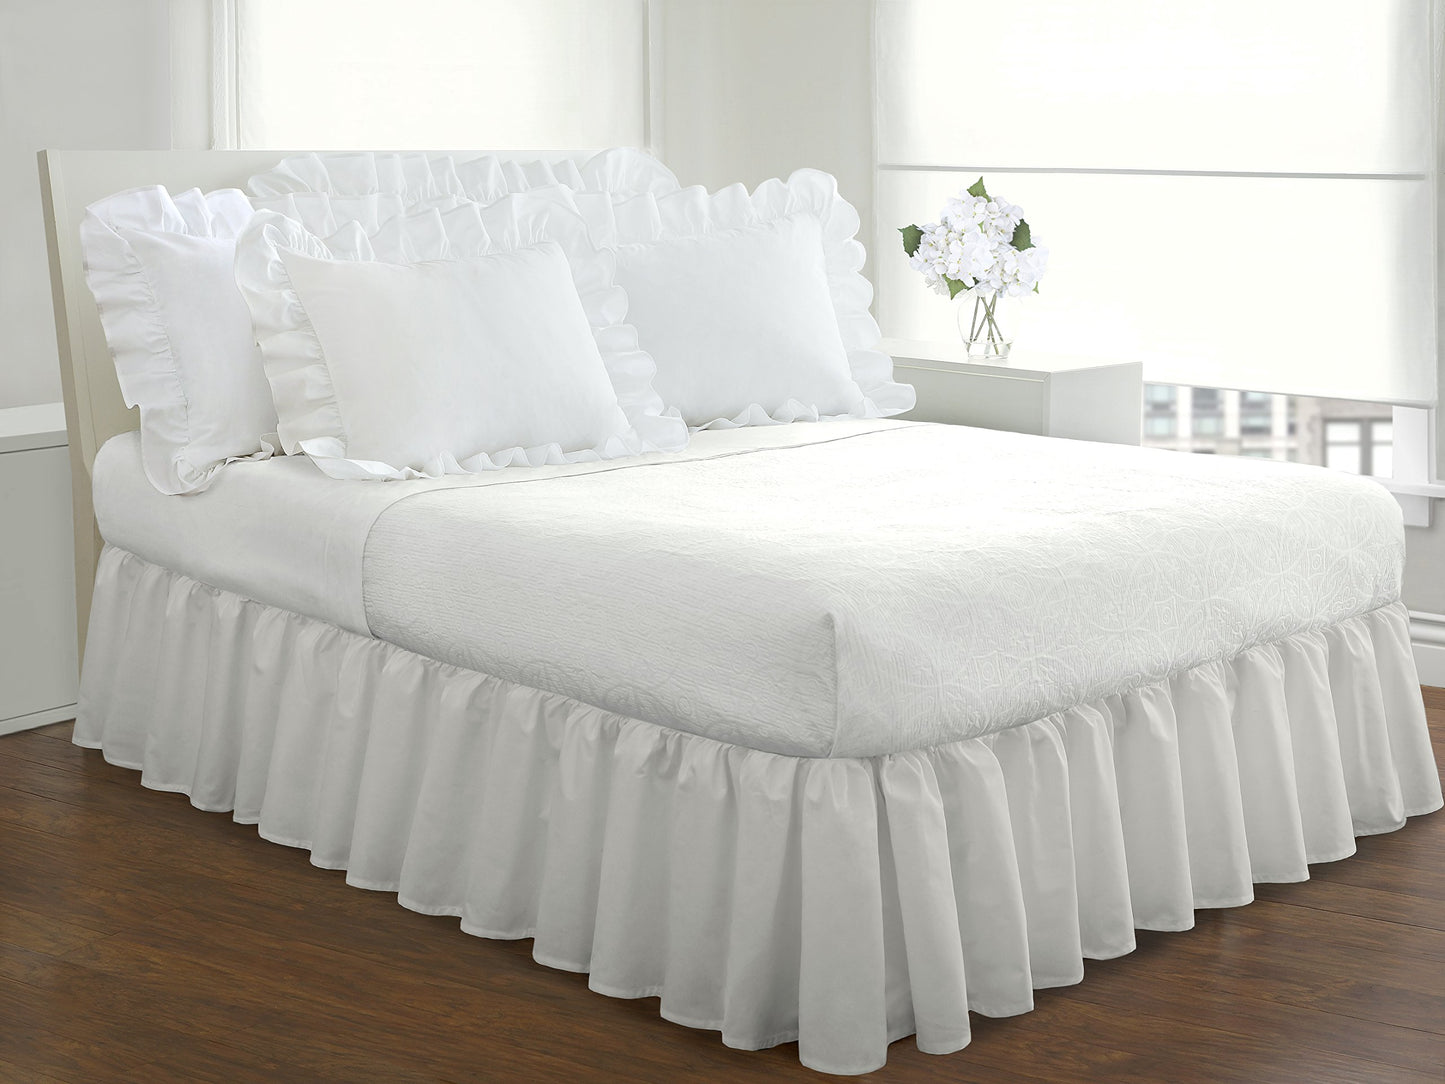 Fresh Ideas Bedding Ruffled Bed Skirt, Classic 14” Drop Length, Gathered Styling, Cali King, White